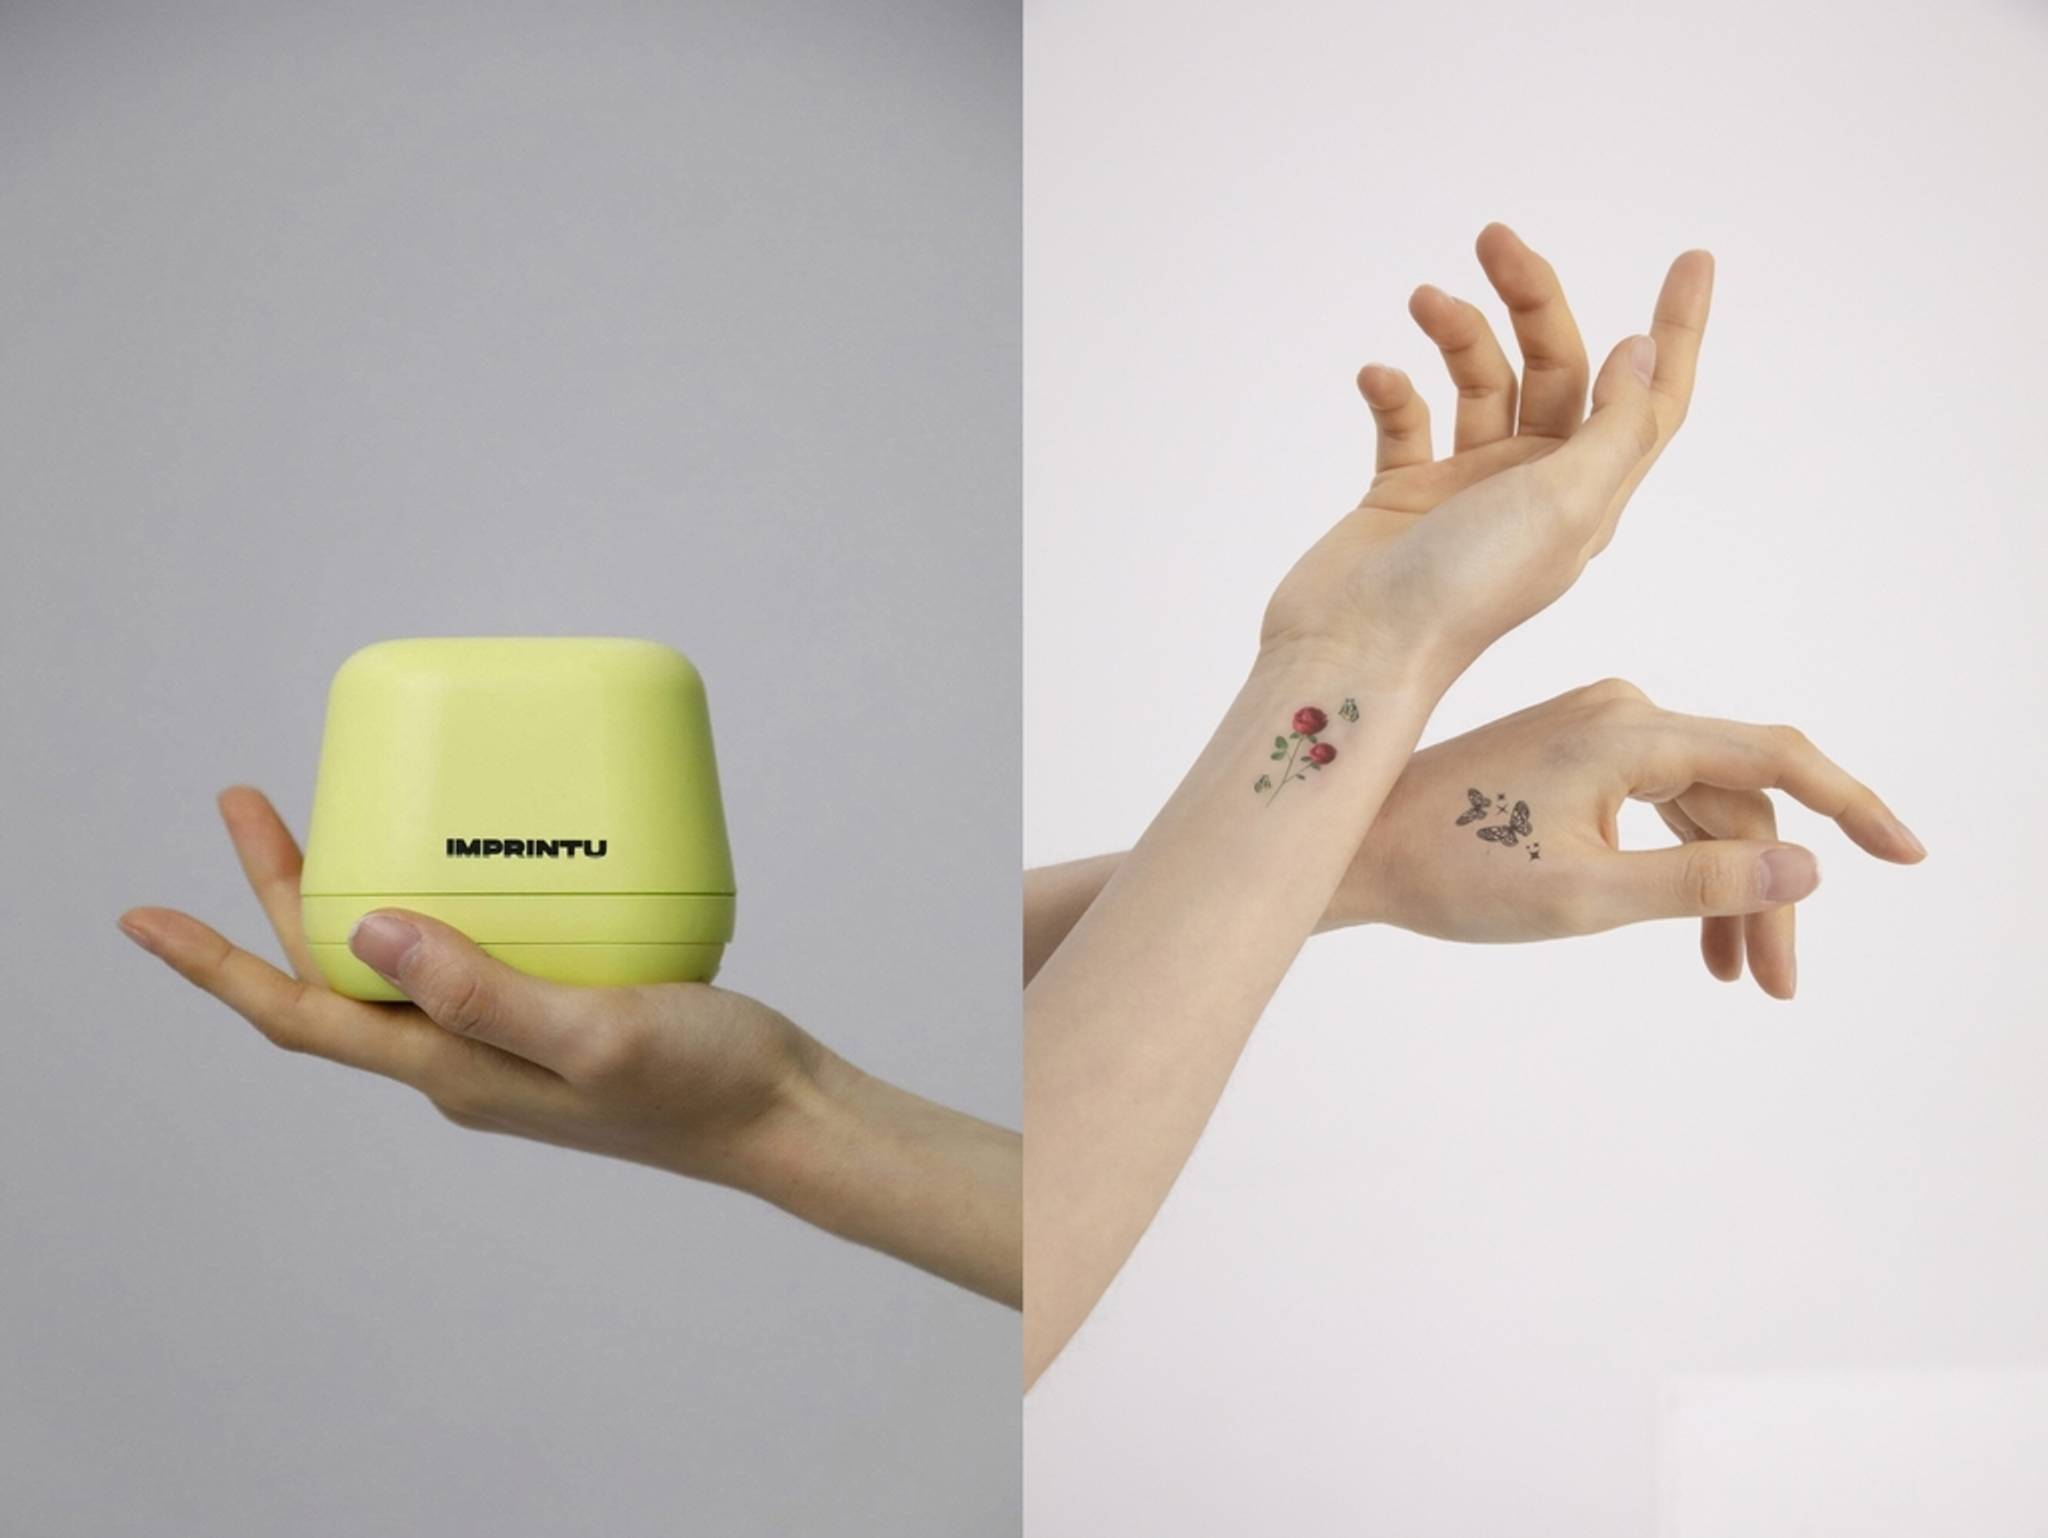 LG targets Gen Z with portable temporary tattoo printer